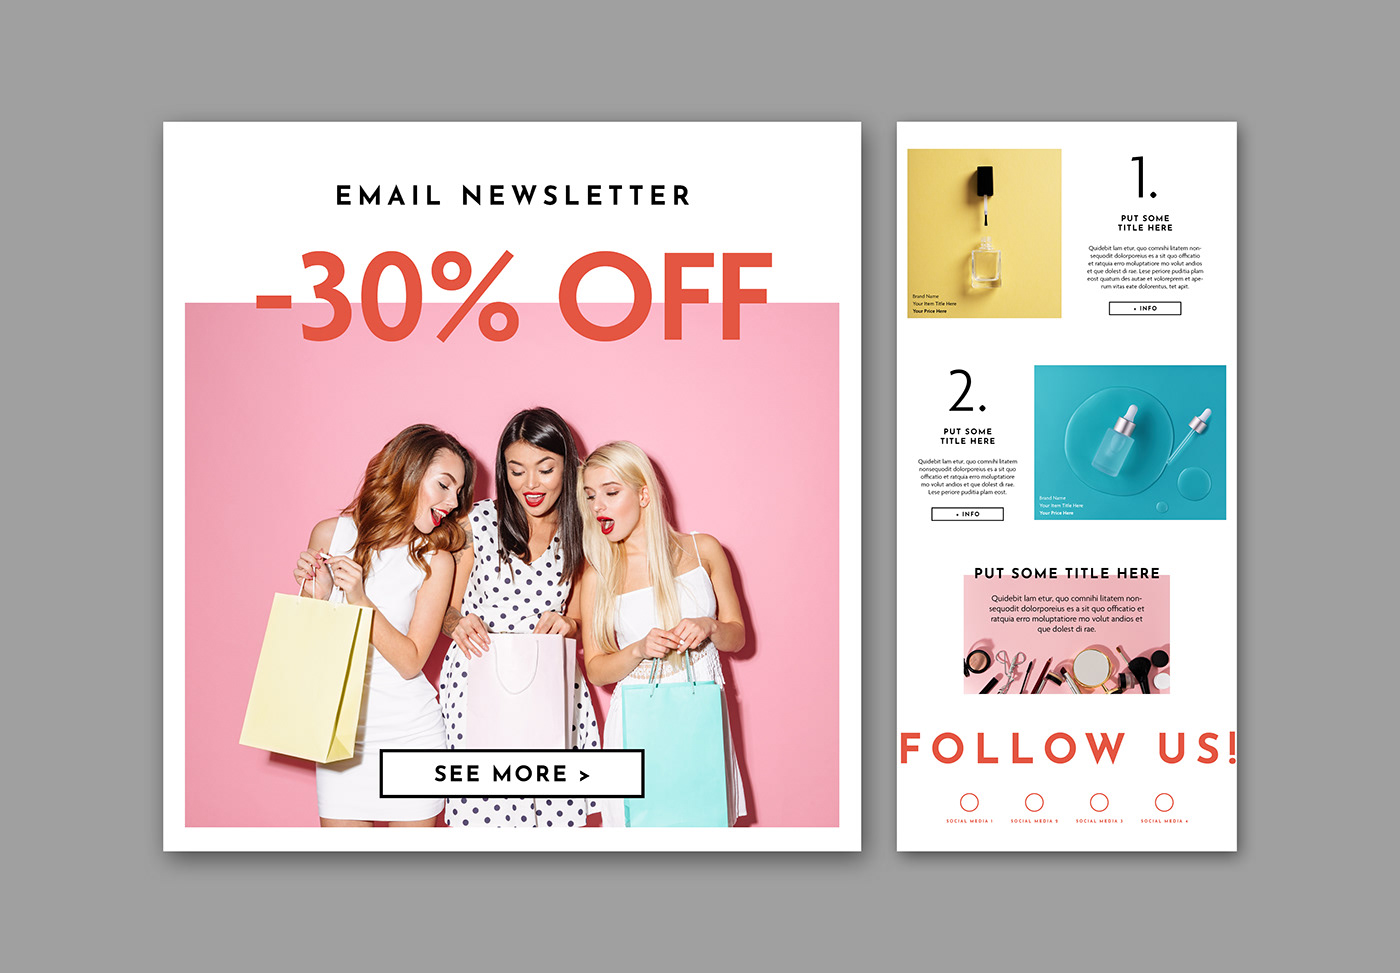 template Email newsletter digital marketing   sale mail Web site landing page